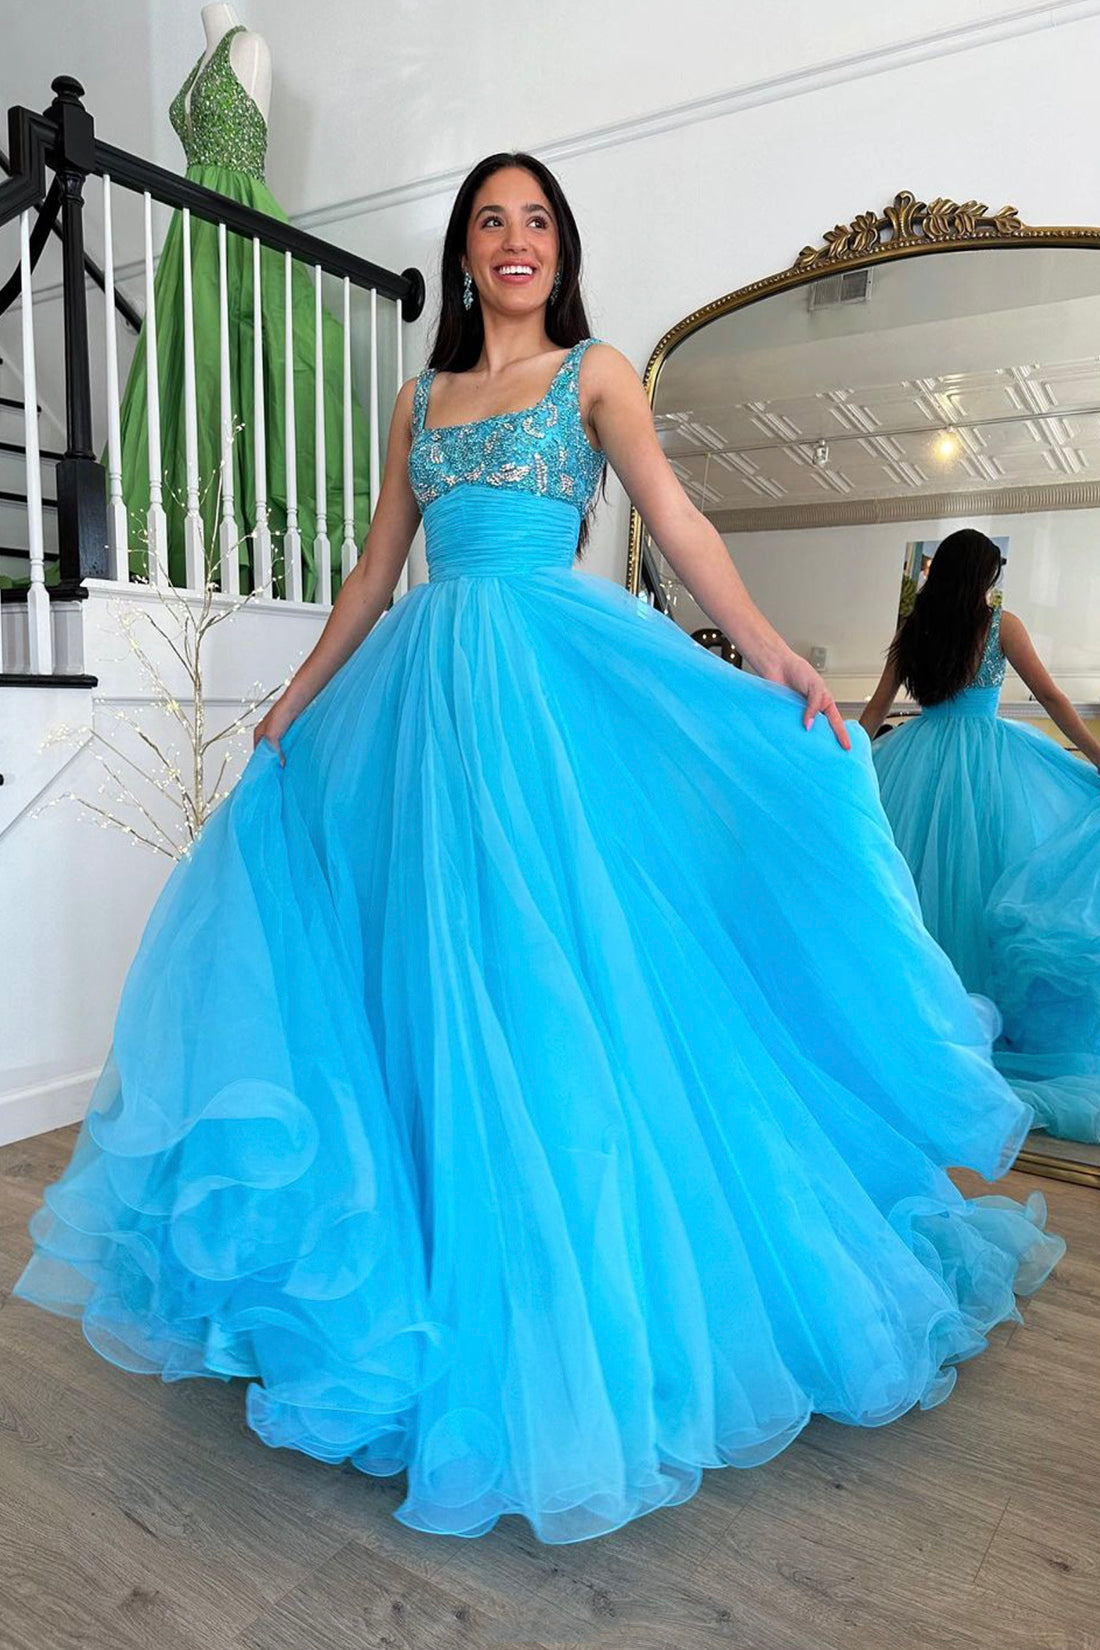 Blue Tulle Beaded Long Floor Length Prom Dress, Beautiful A-Line Evening Party Dress